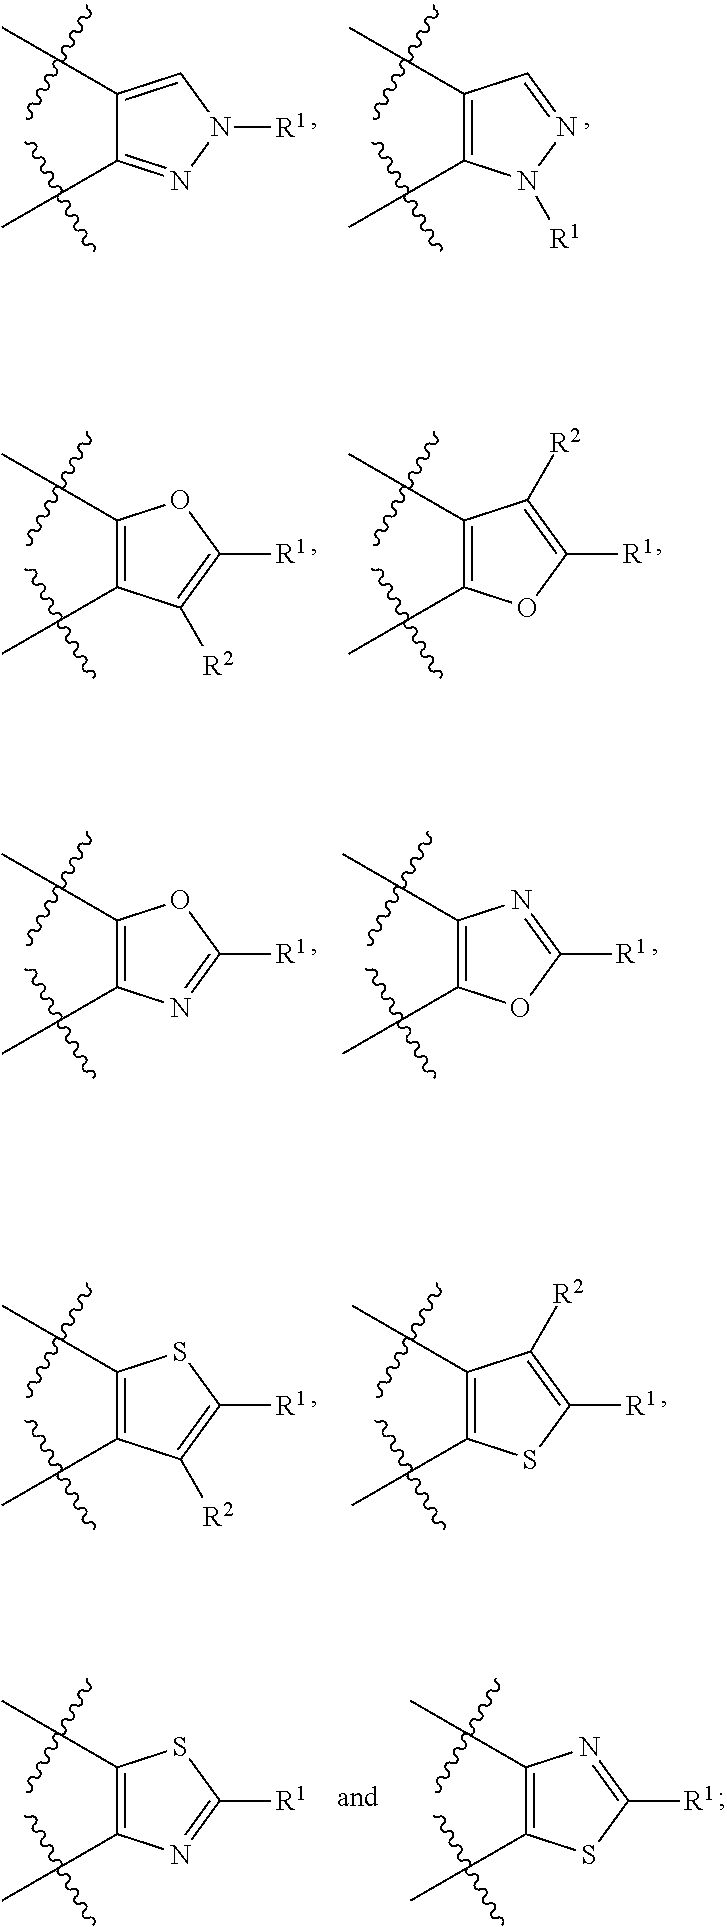 Benzo-fused heterocyclic derivatives useful as agonists of GPR120